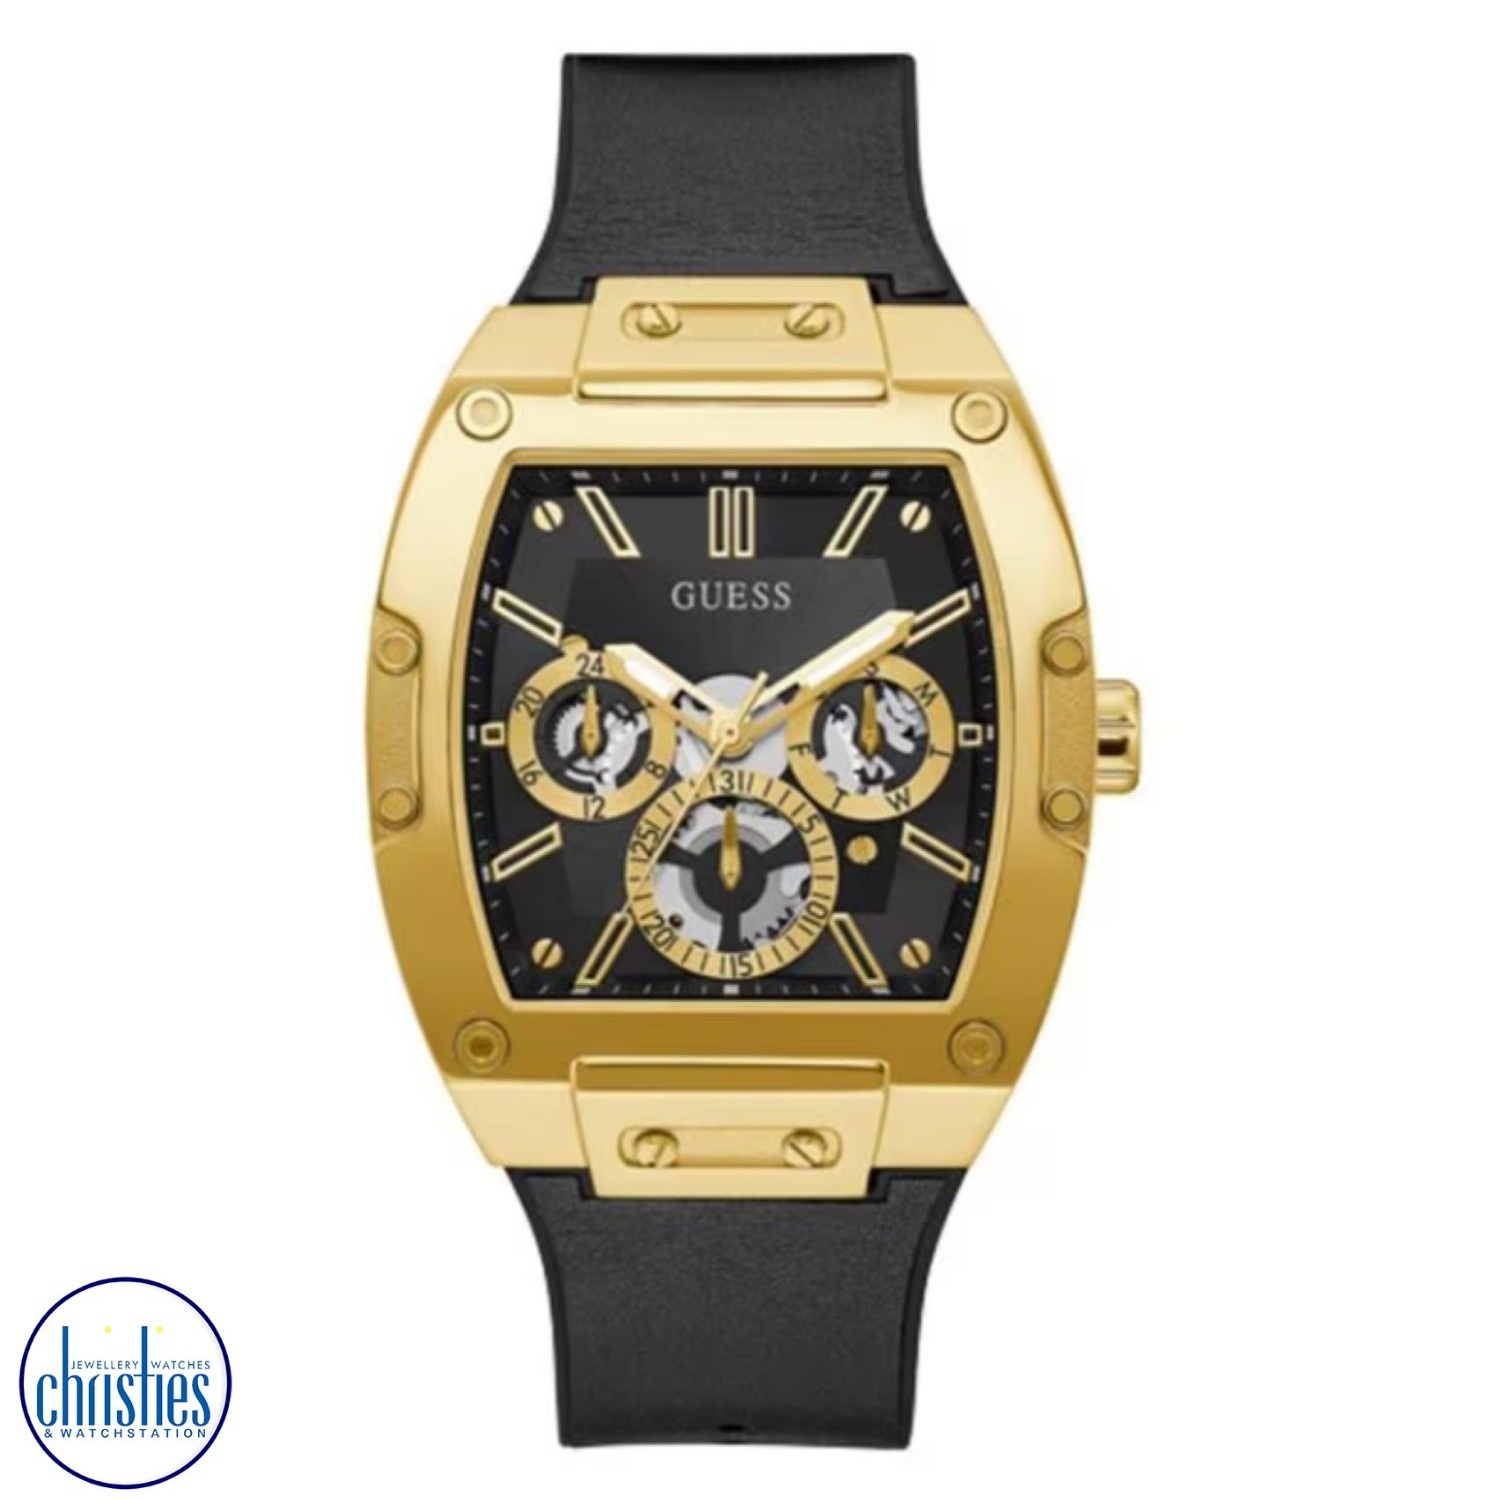 GW0202G1  GOLD TONE CASE BLACK GENUINE LEATHER/SILICONE WATCH. This is a stylish men's watch with a modern and sleek design.